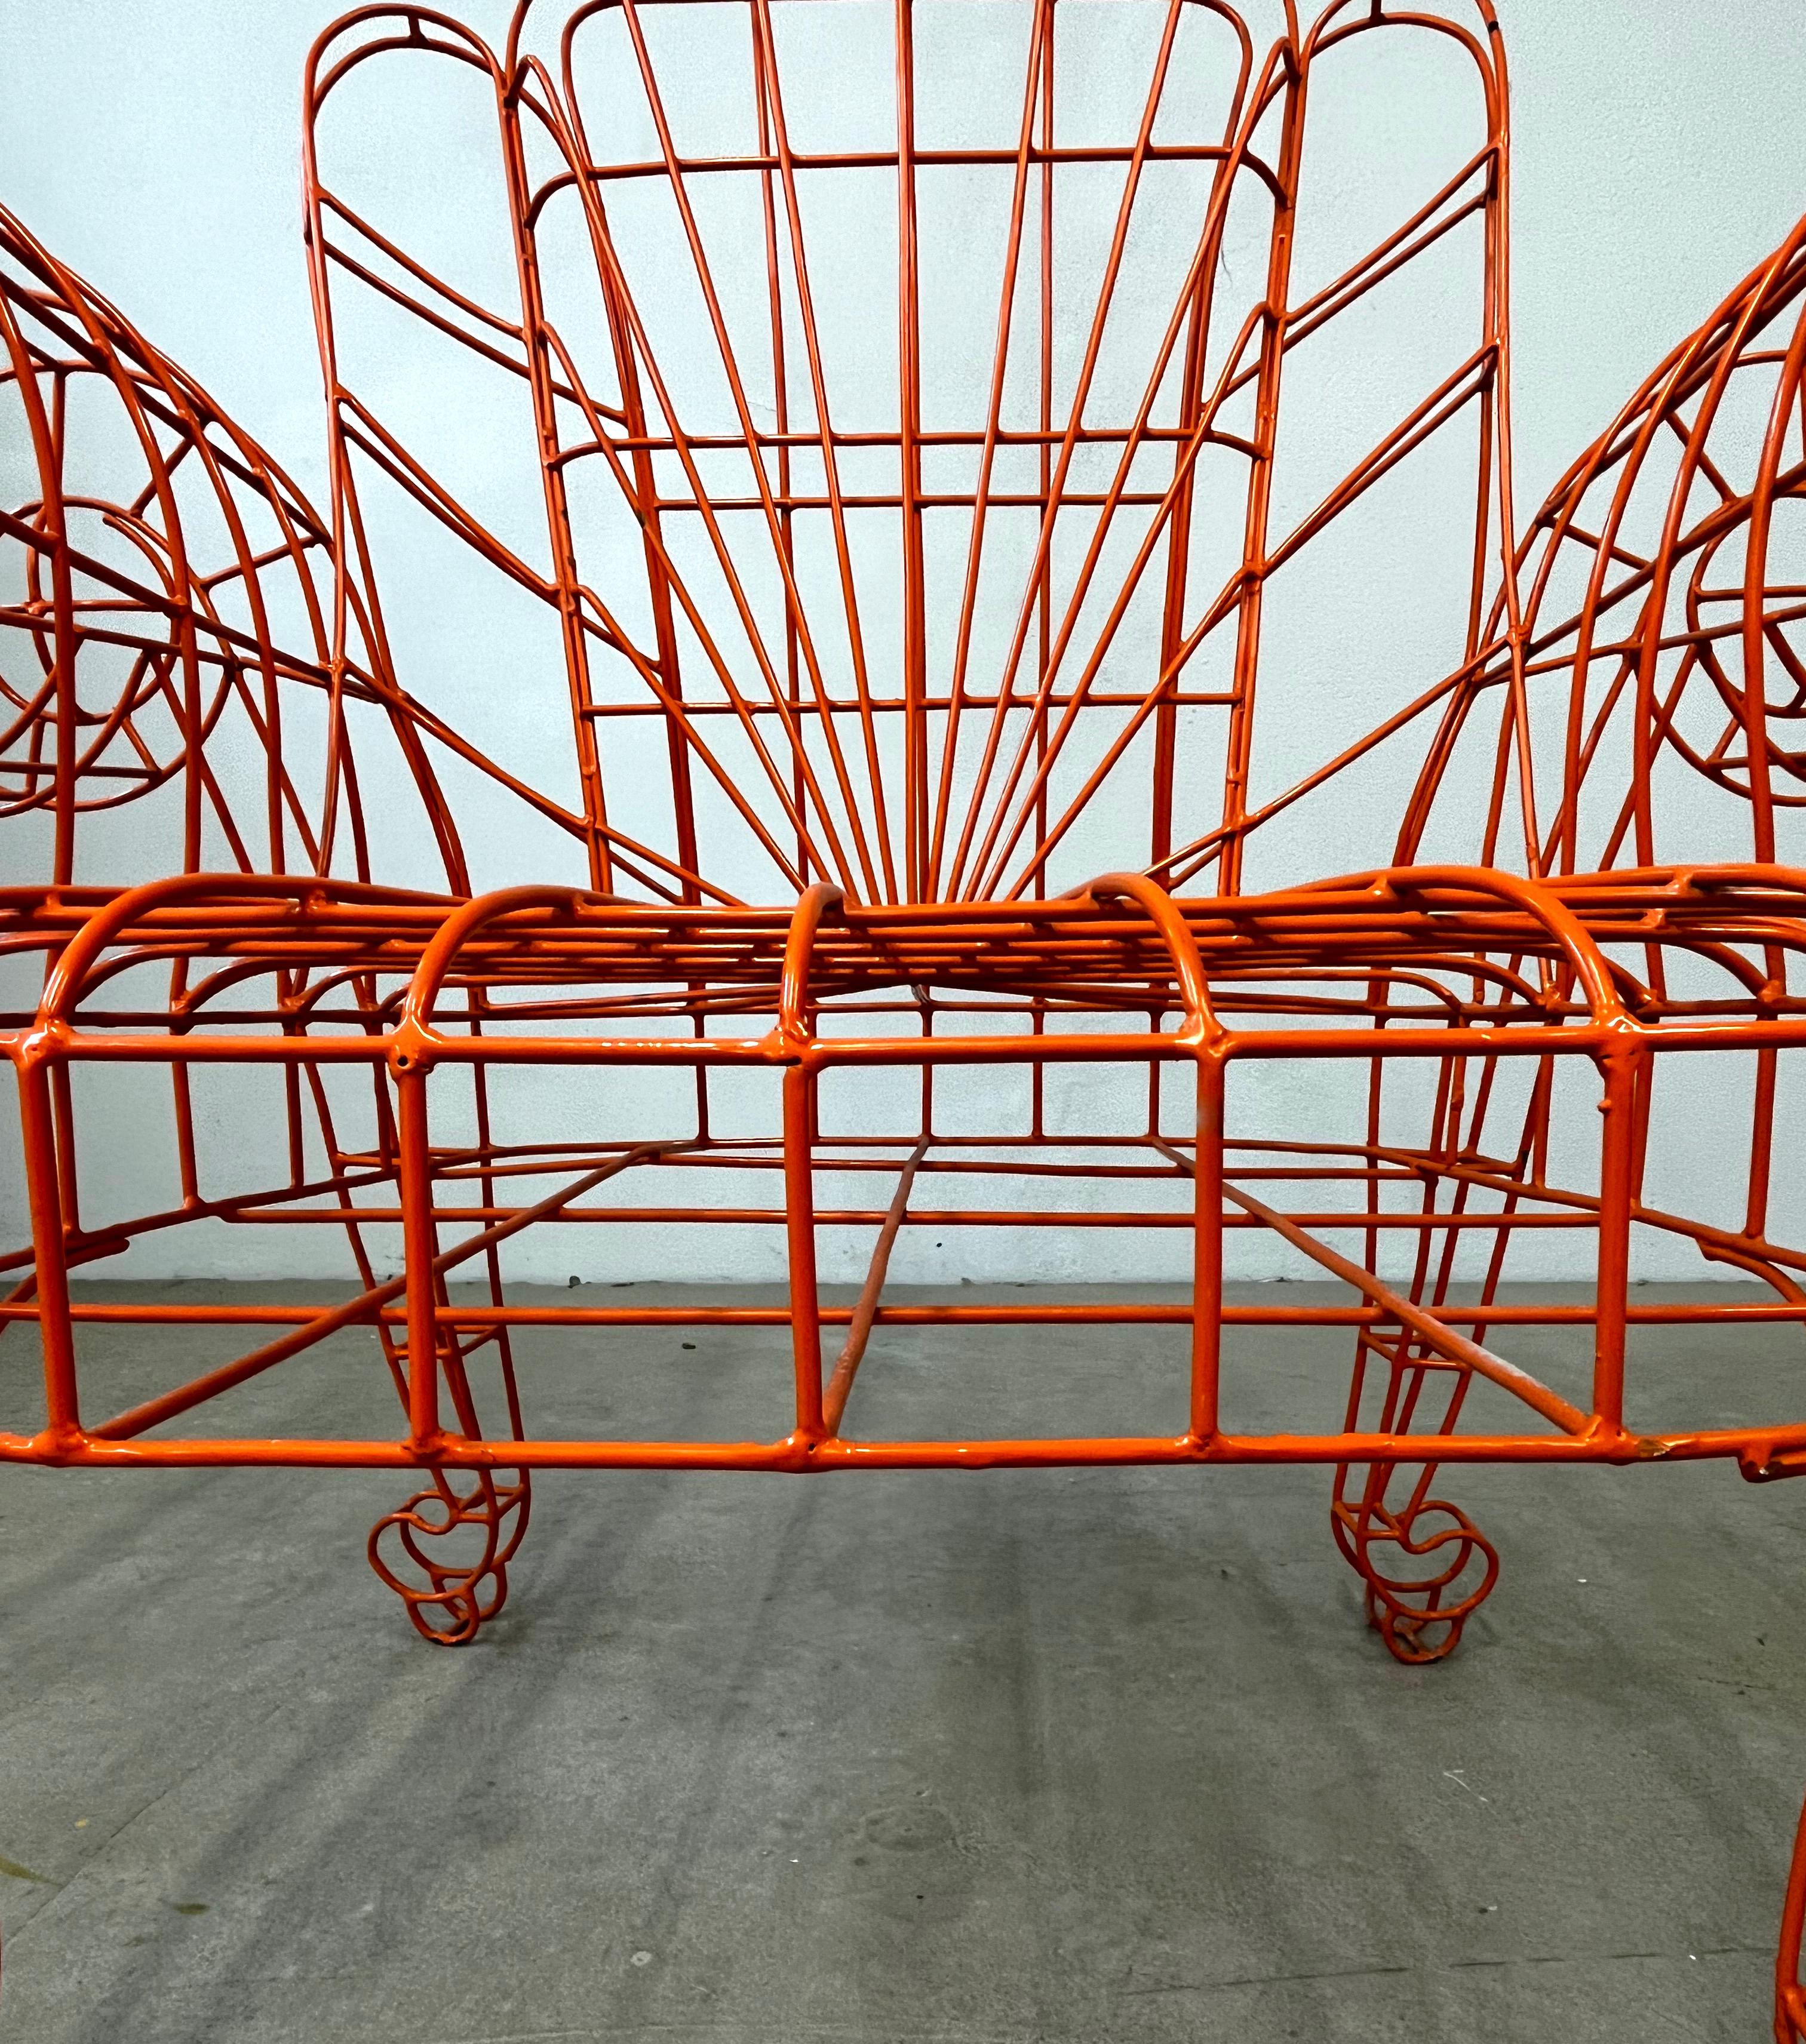 Spazzapan Italian Post-Modern Pop Art Orange Metal Sculpture Throne Armchair In Good Condition For Sale In New York, NY